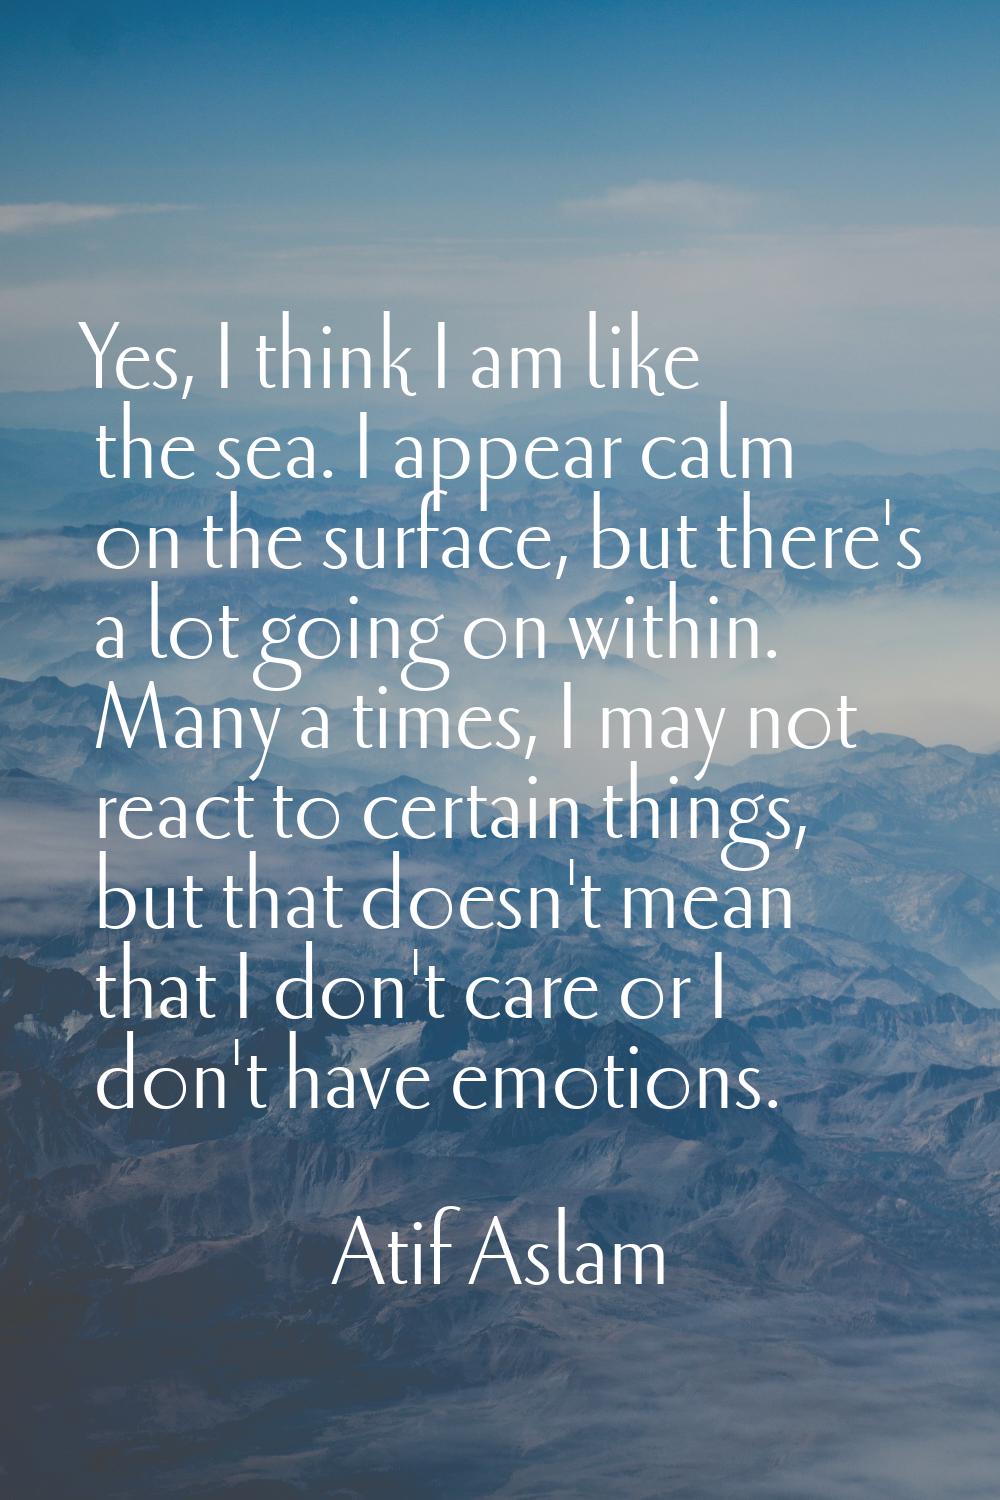 Yes, I think I am like the sea. I appear calm on the surface, but there's a lot going on within. Ma